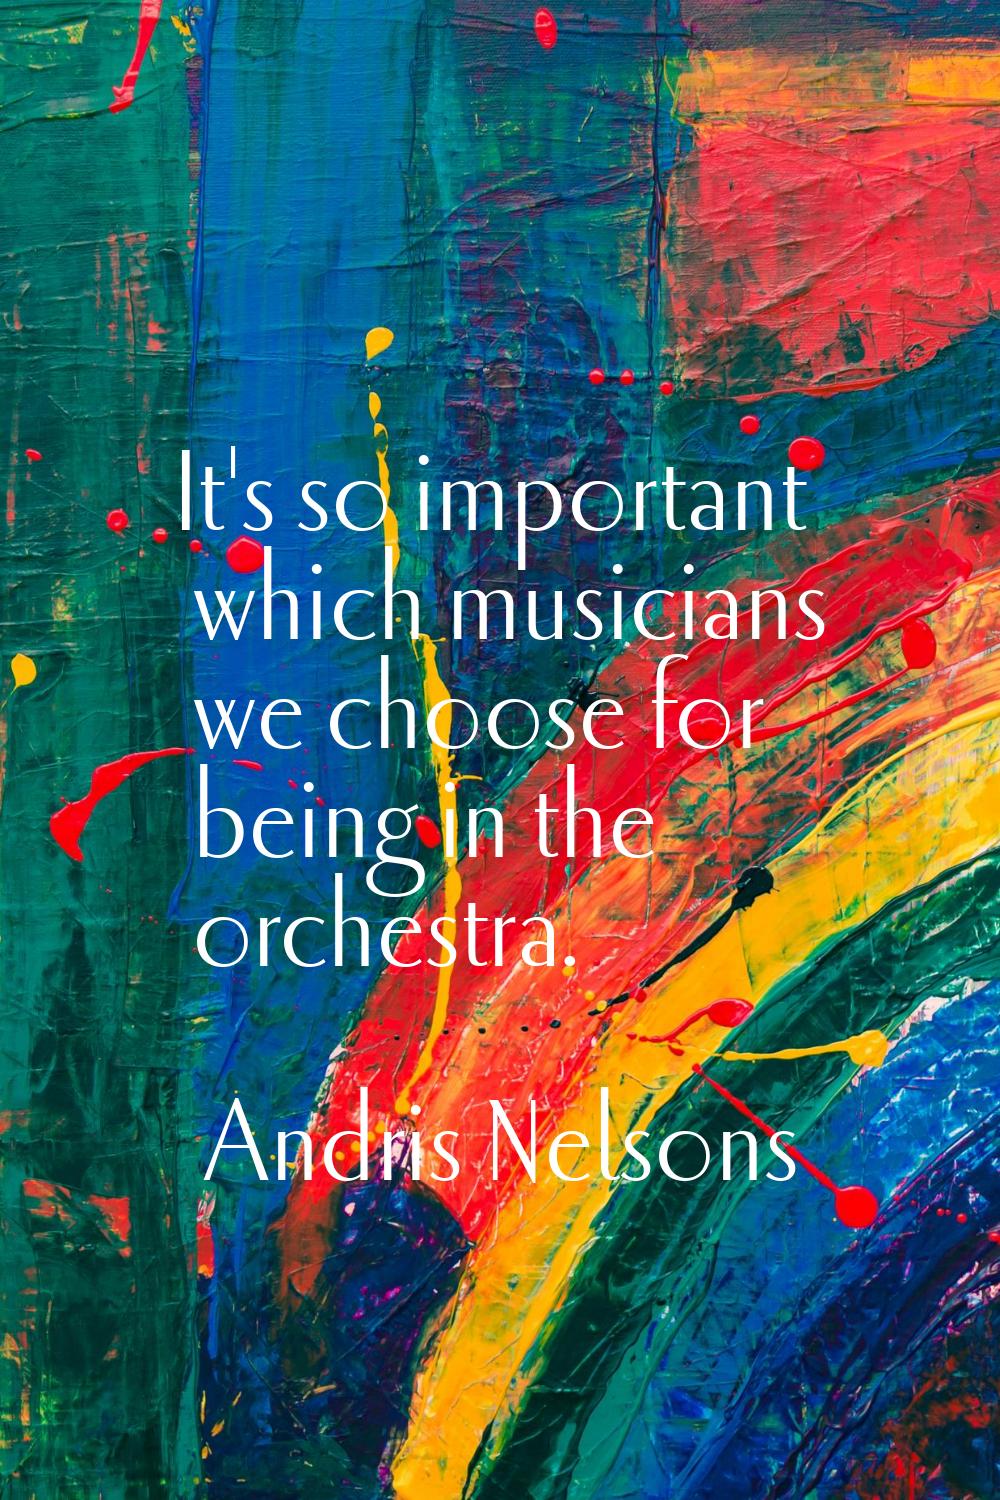 It's so important which musicians we choose for being in the orchestra.